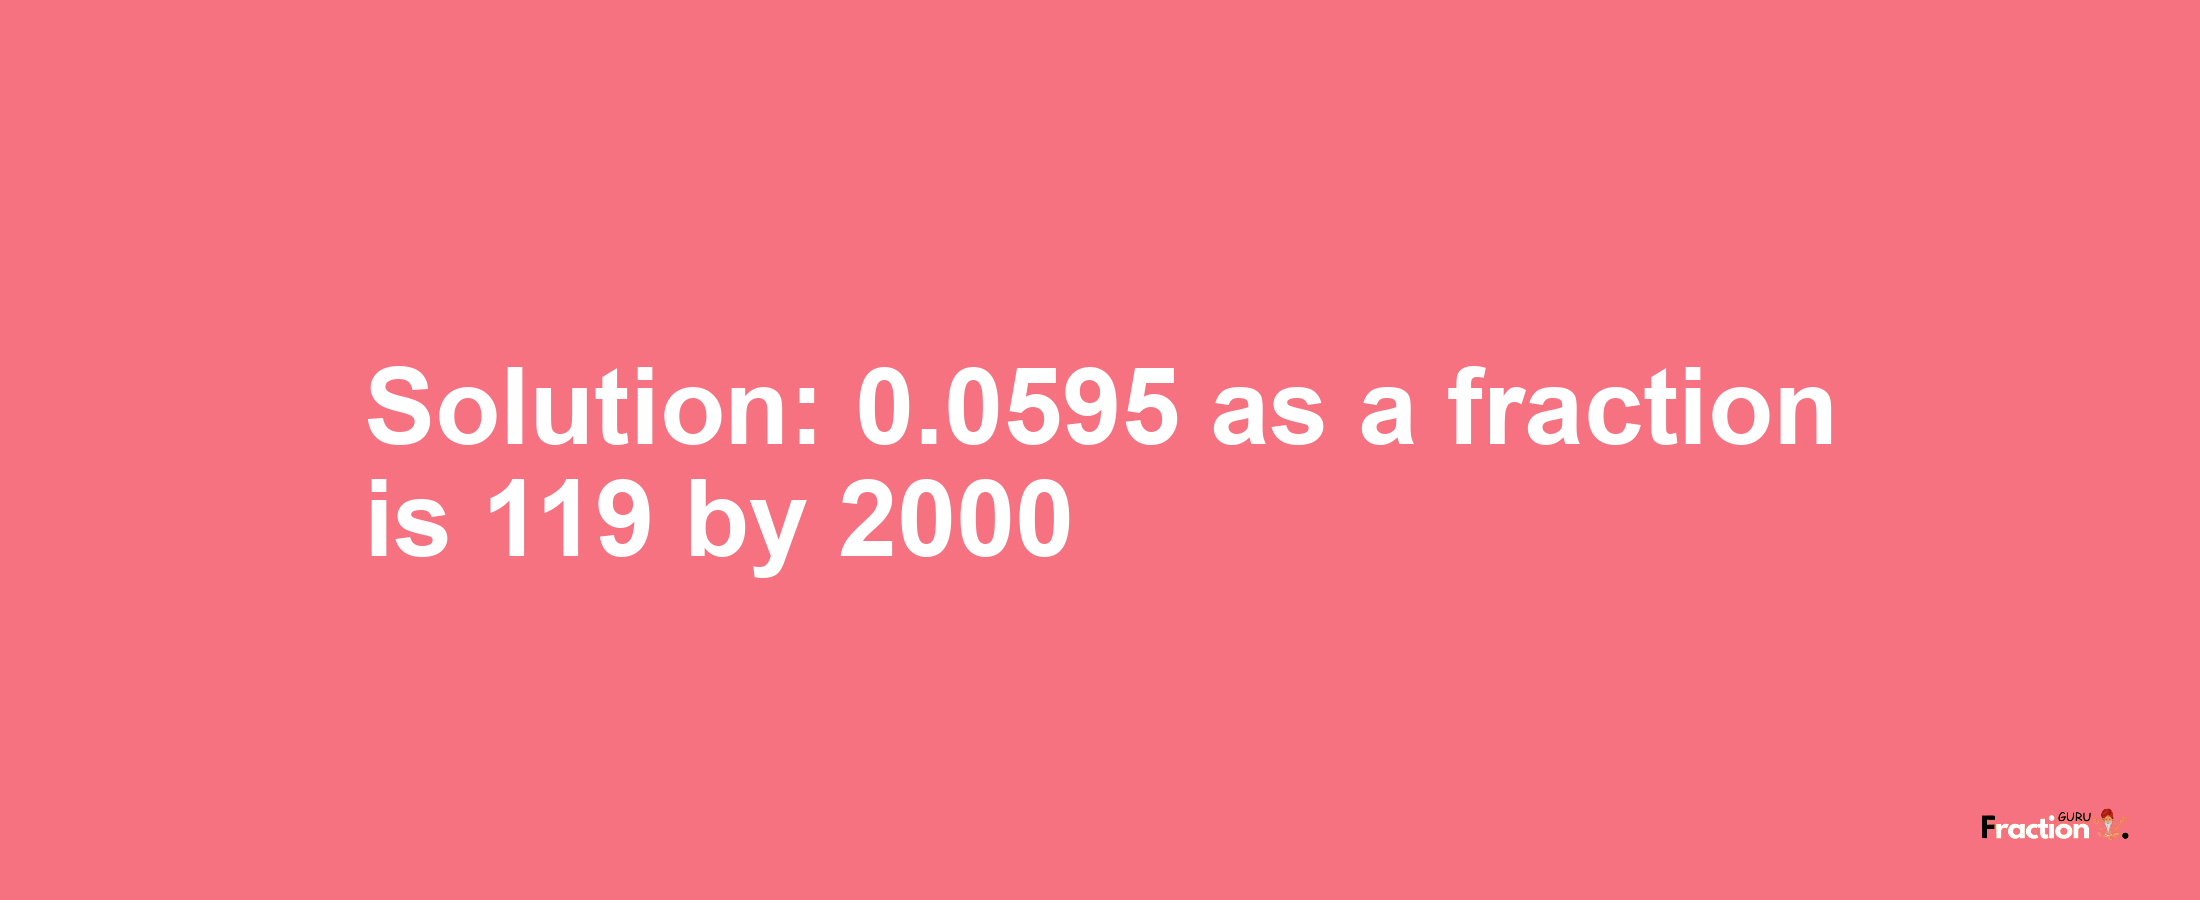 Solution:0.0595 as a fraction is 119/2000